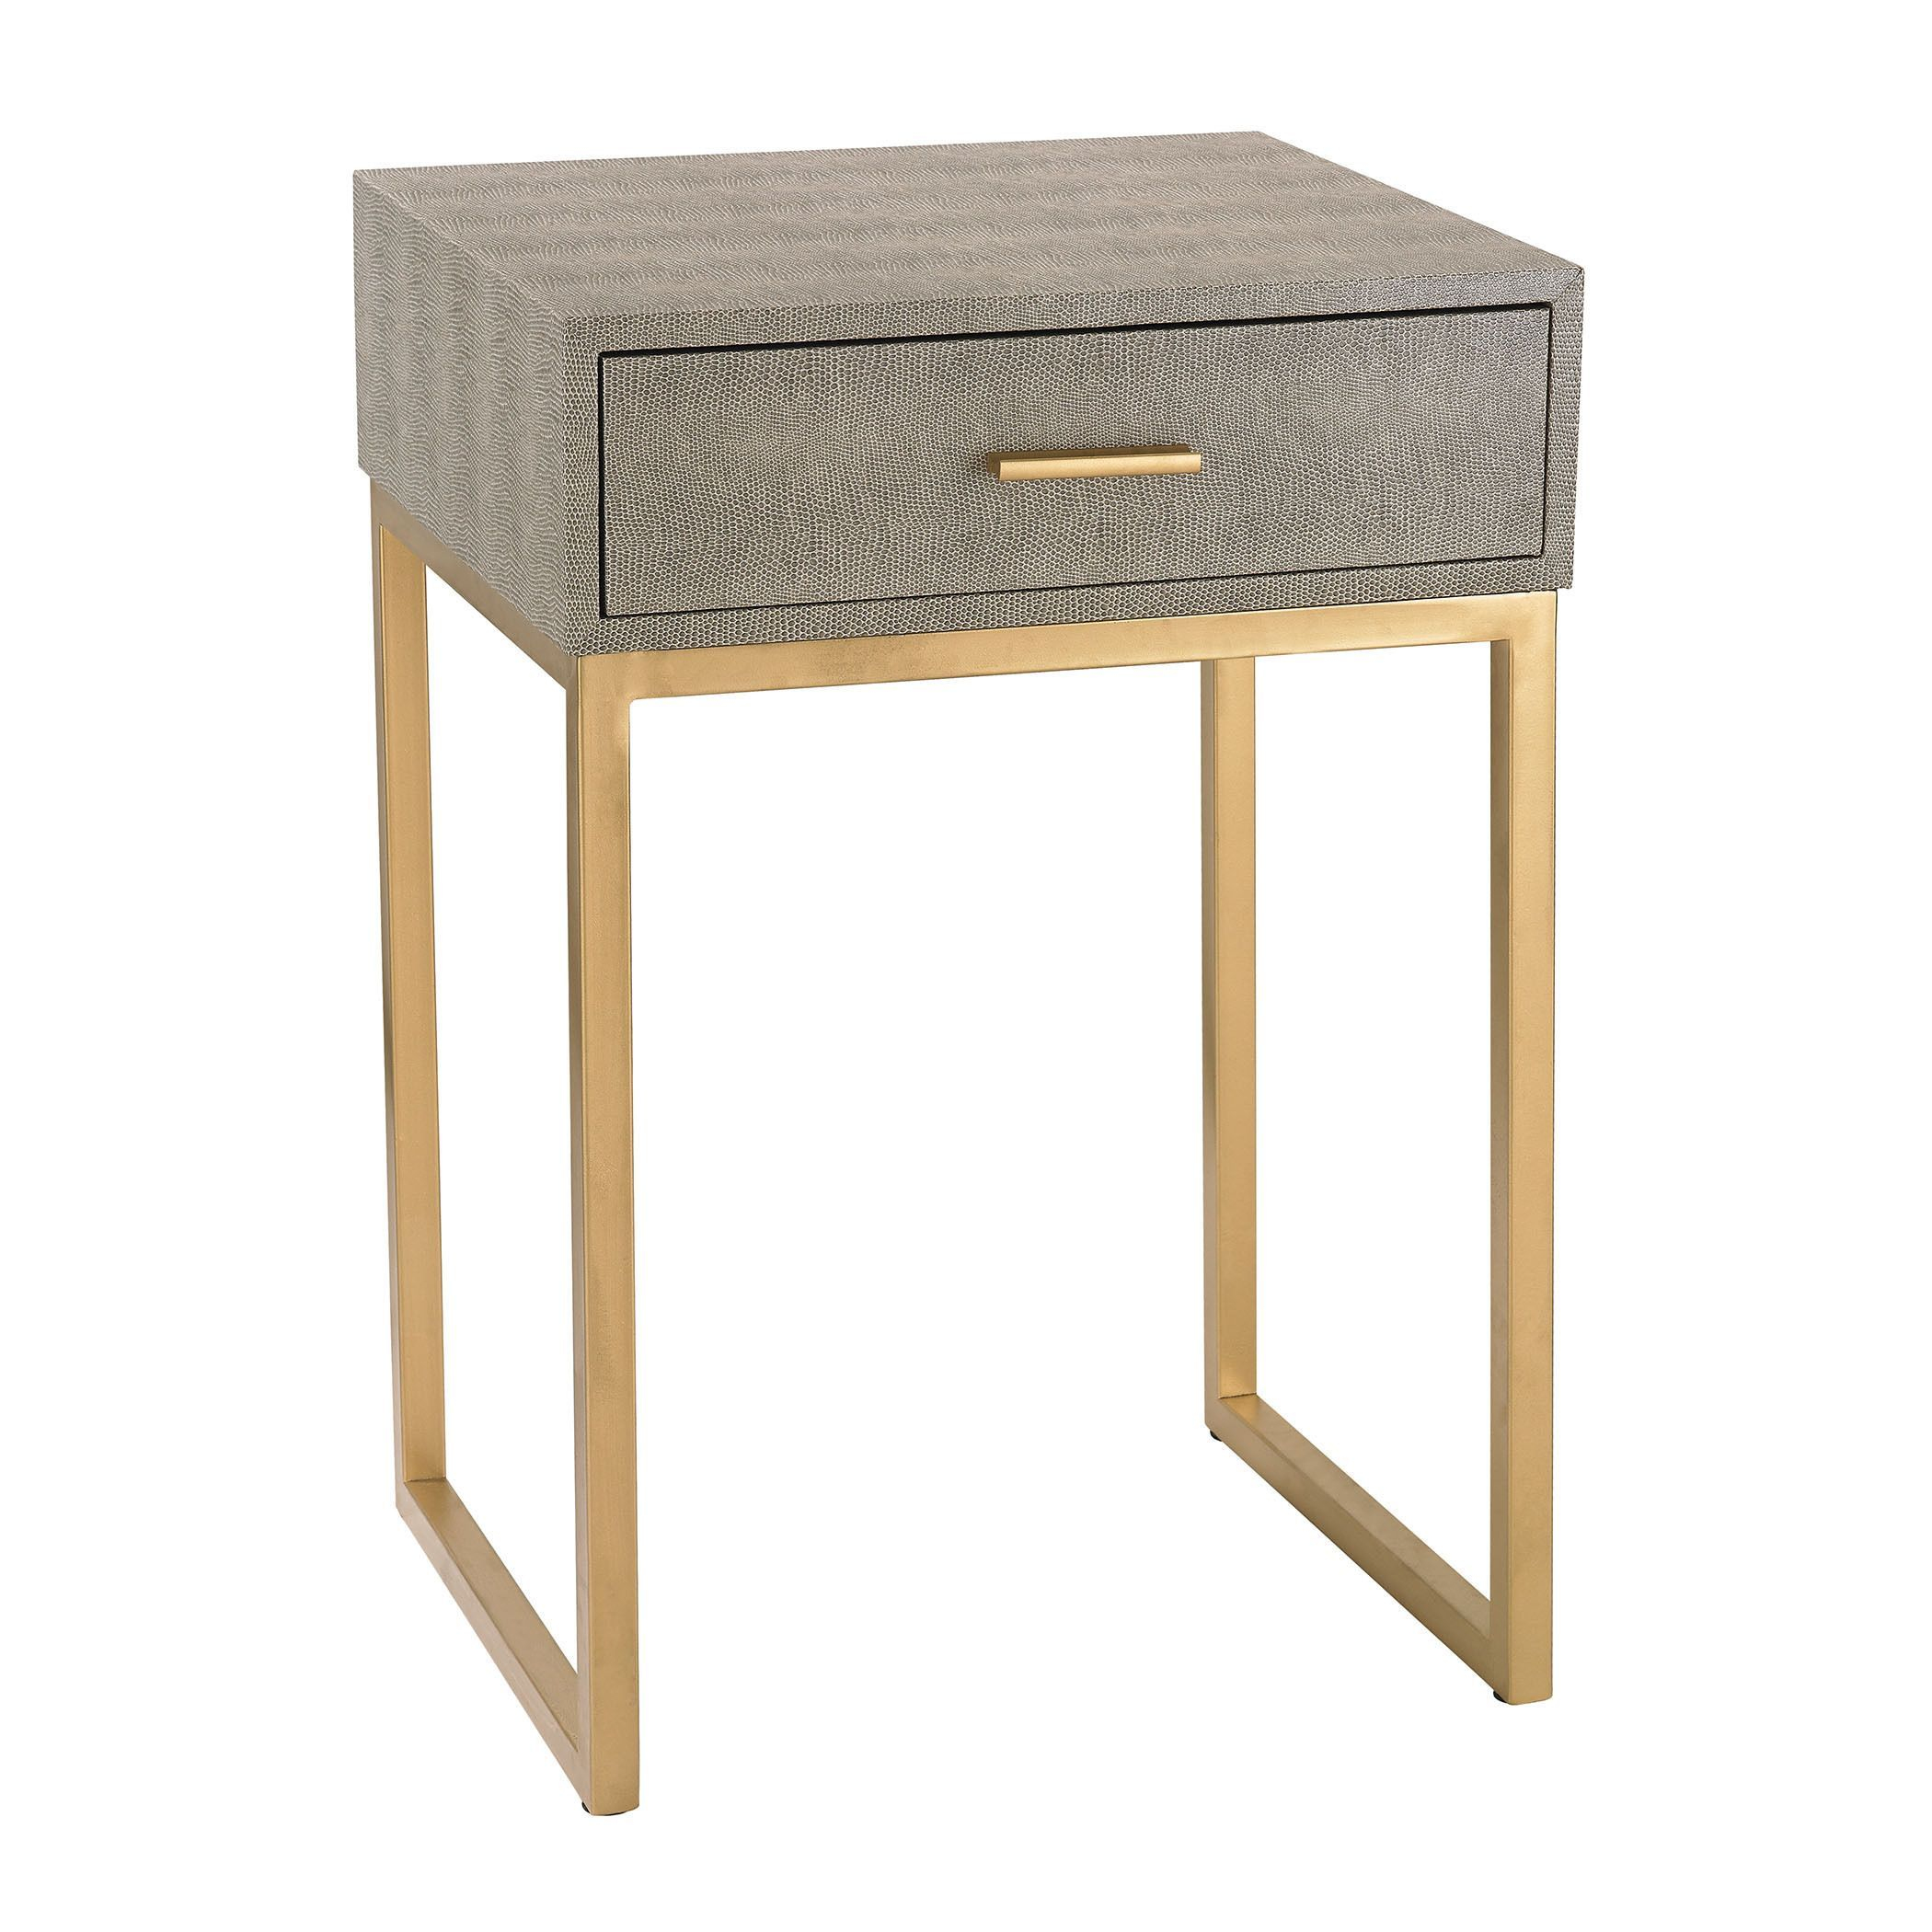 interior exterior gorgeous small accent table with drawer such functional style your decor the round quatrefoil wood bronze curtains threshold bedside home goods and chairs marble